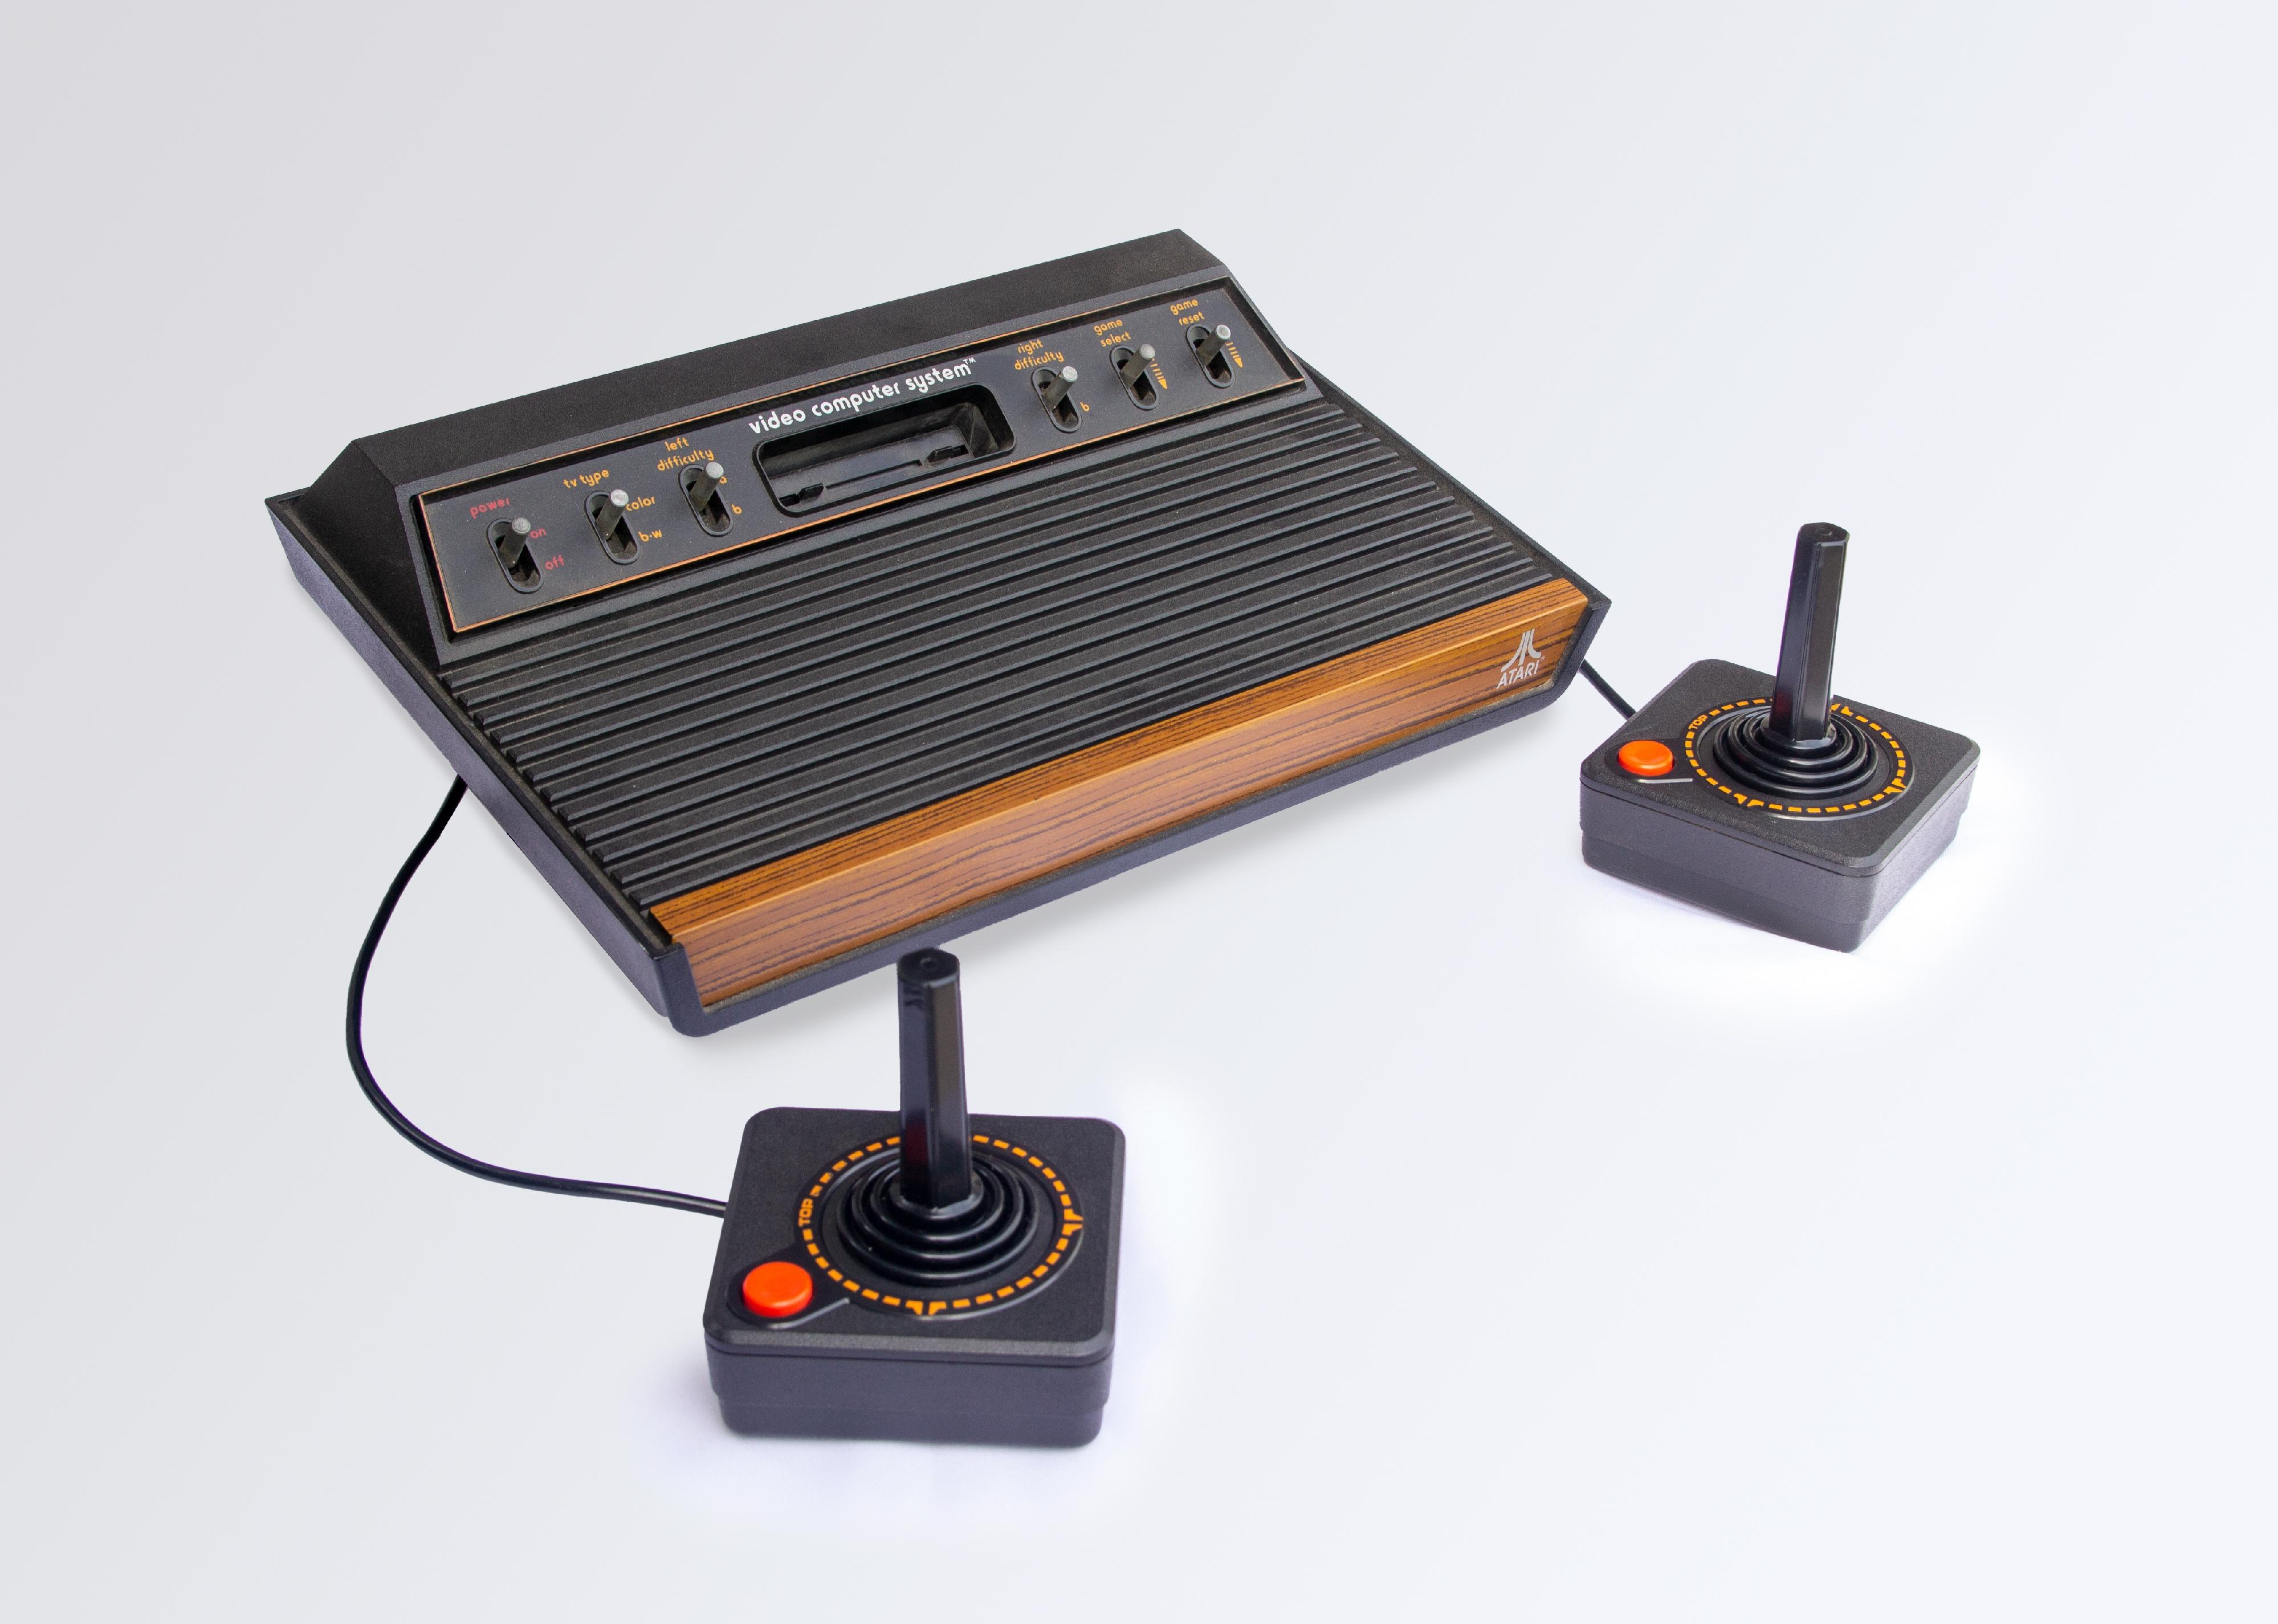 Atari 2600 vintage video game console with a white background.